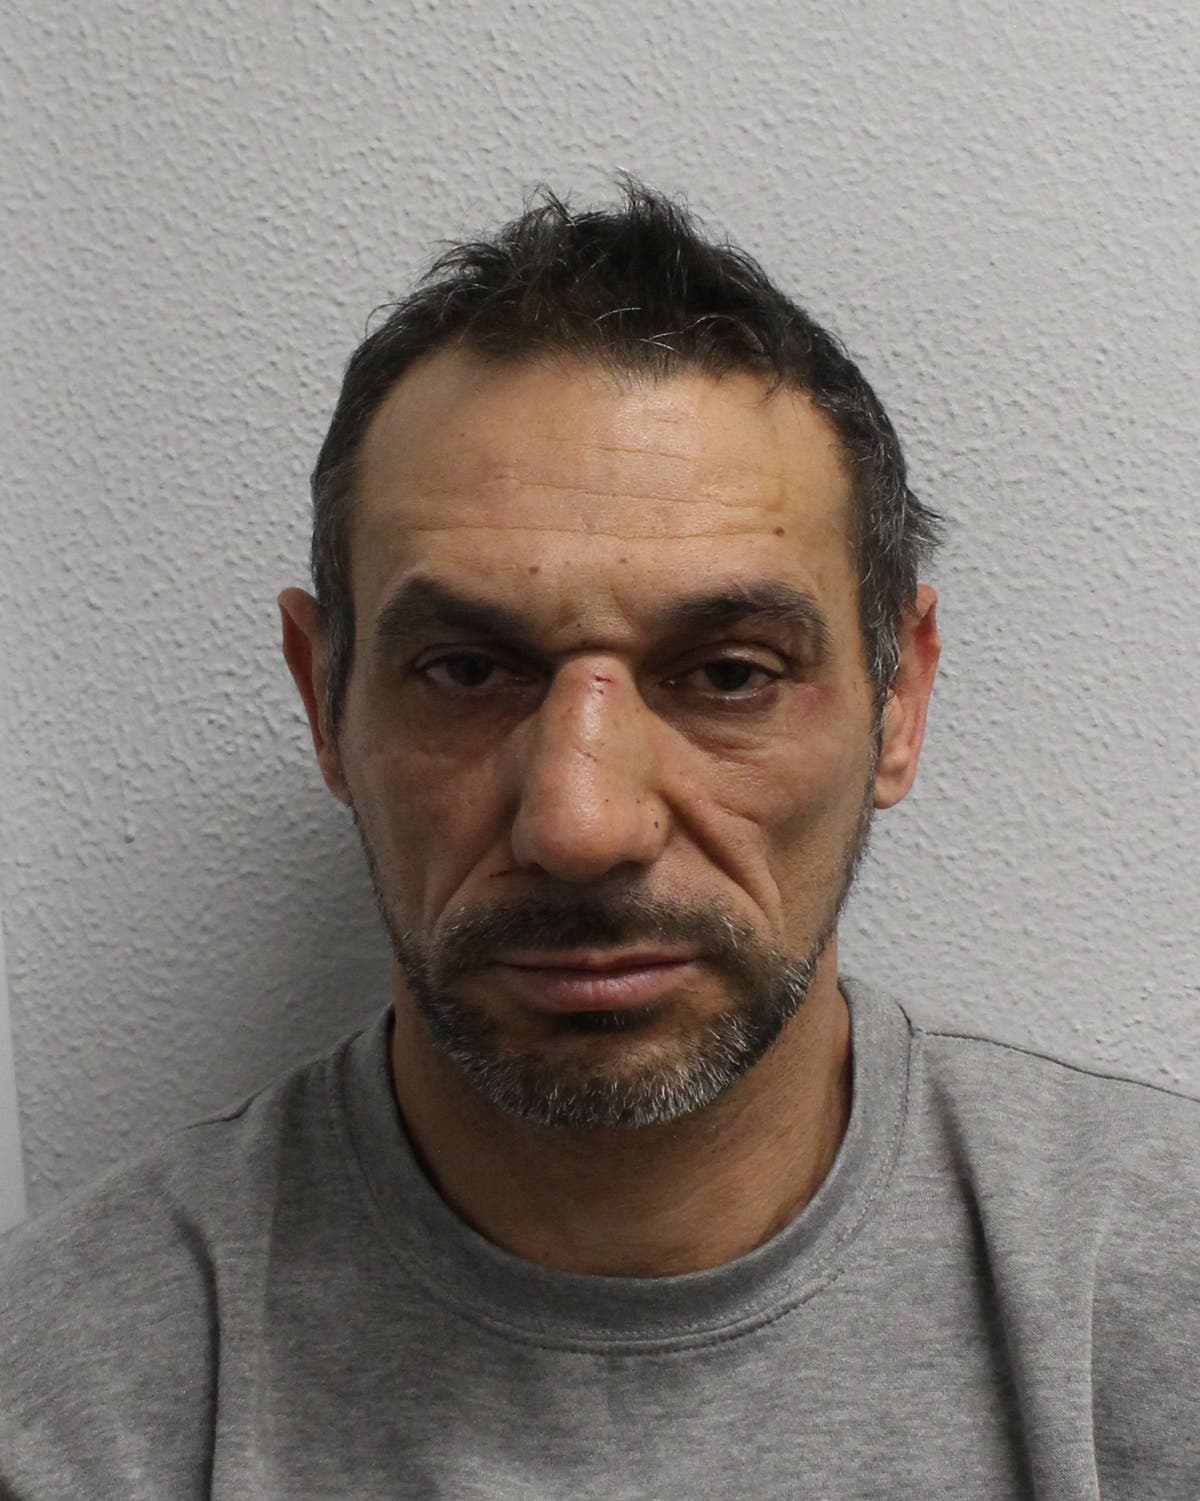 Man who stalked wife through tracking app jailed for vile campaign of violent and controlling domestic abuse